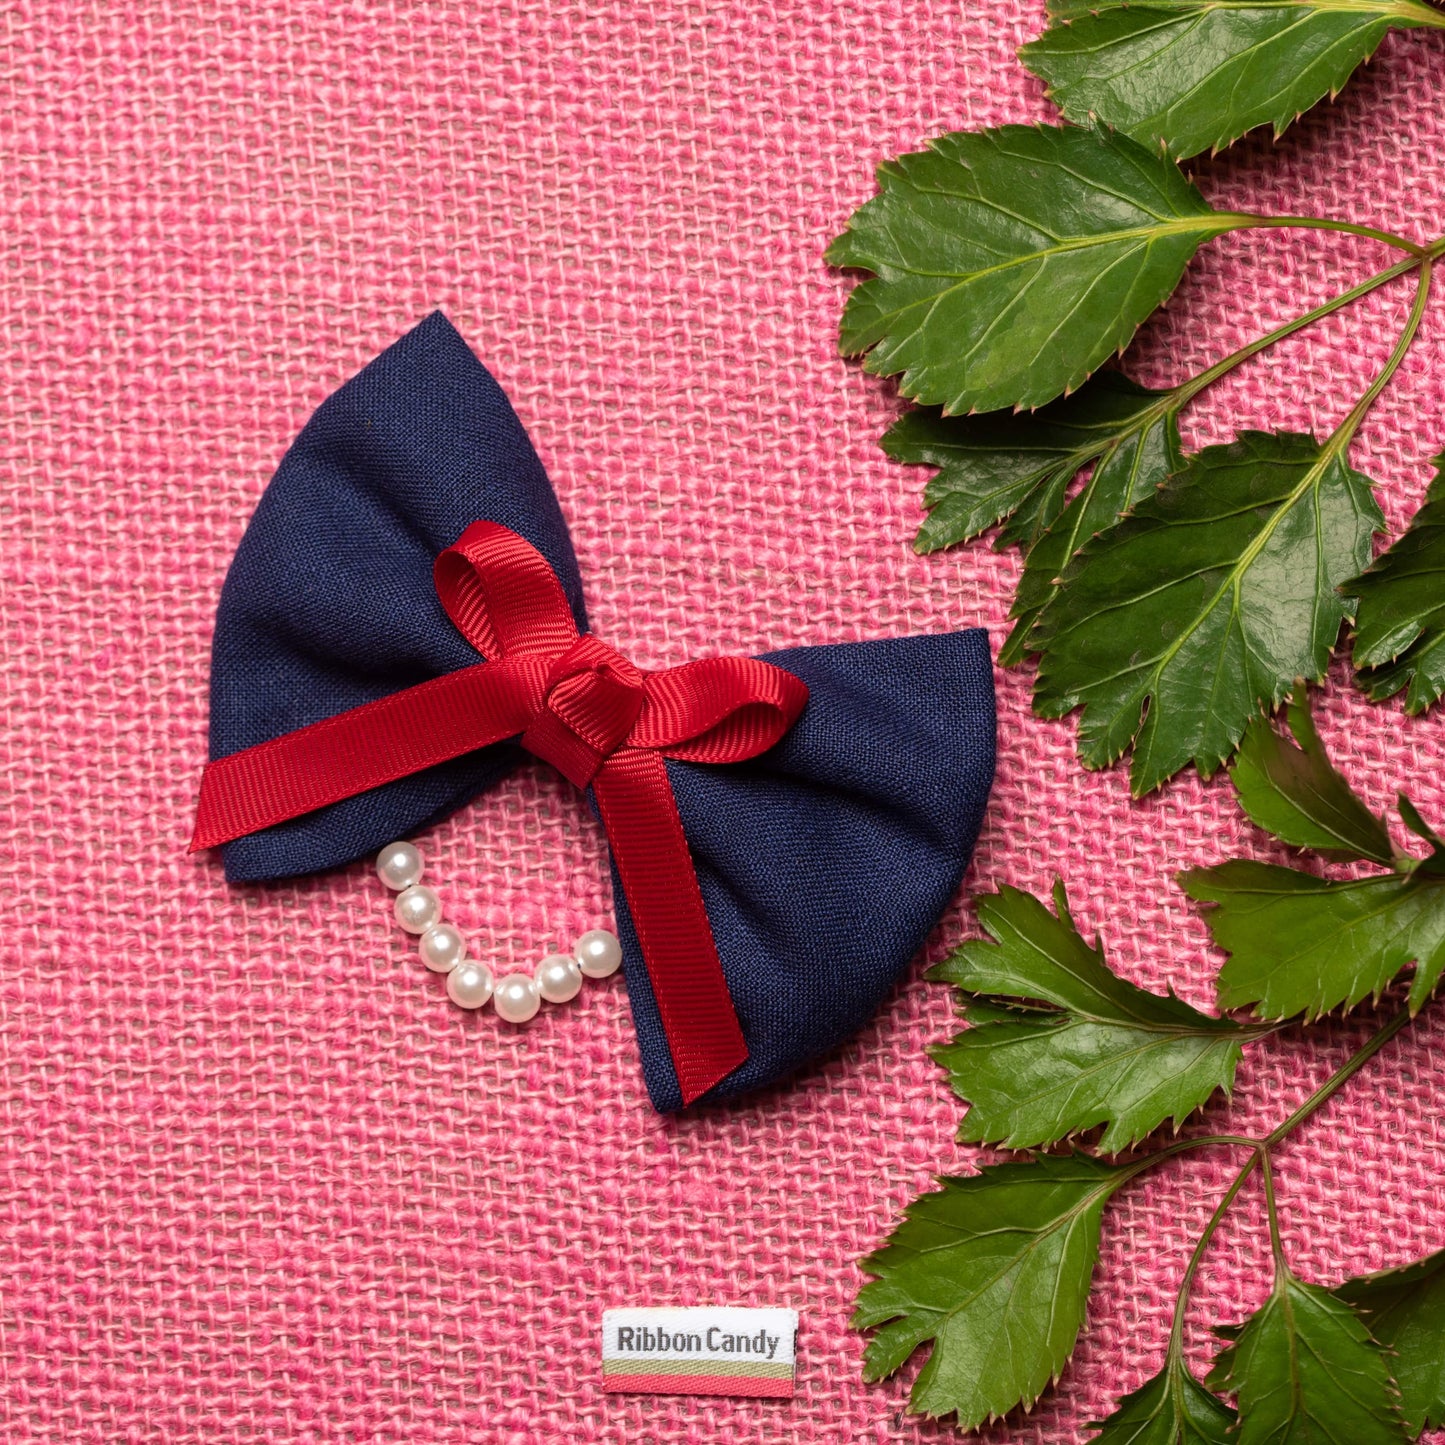 Dual Bow with Pearl Detailing on Alligator Pin - Blue and Red